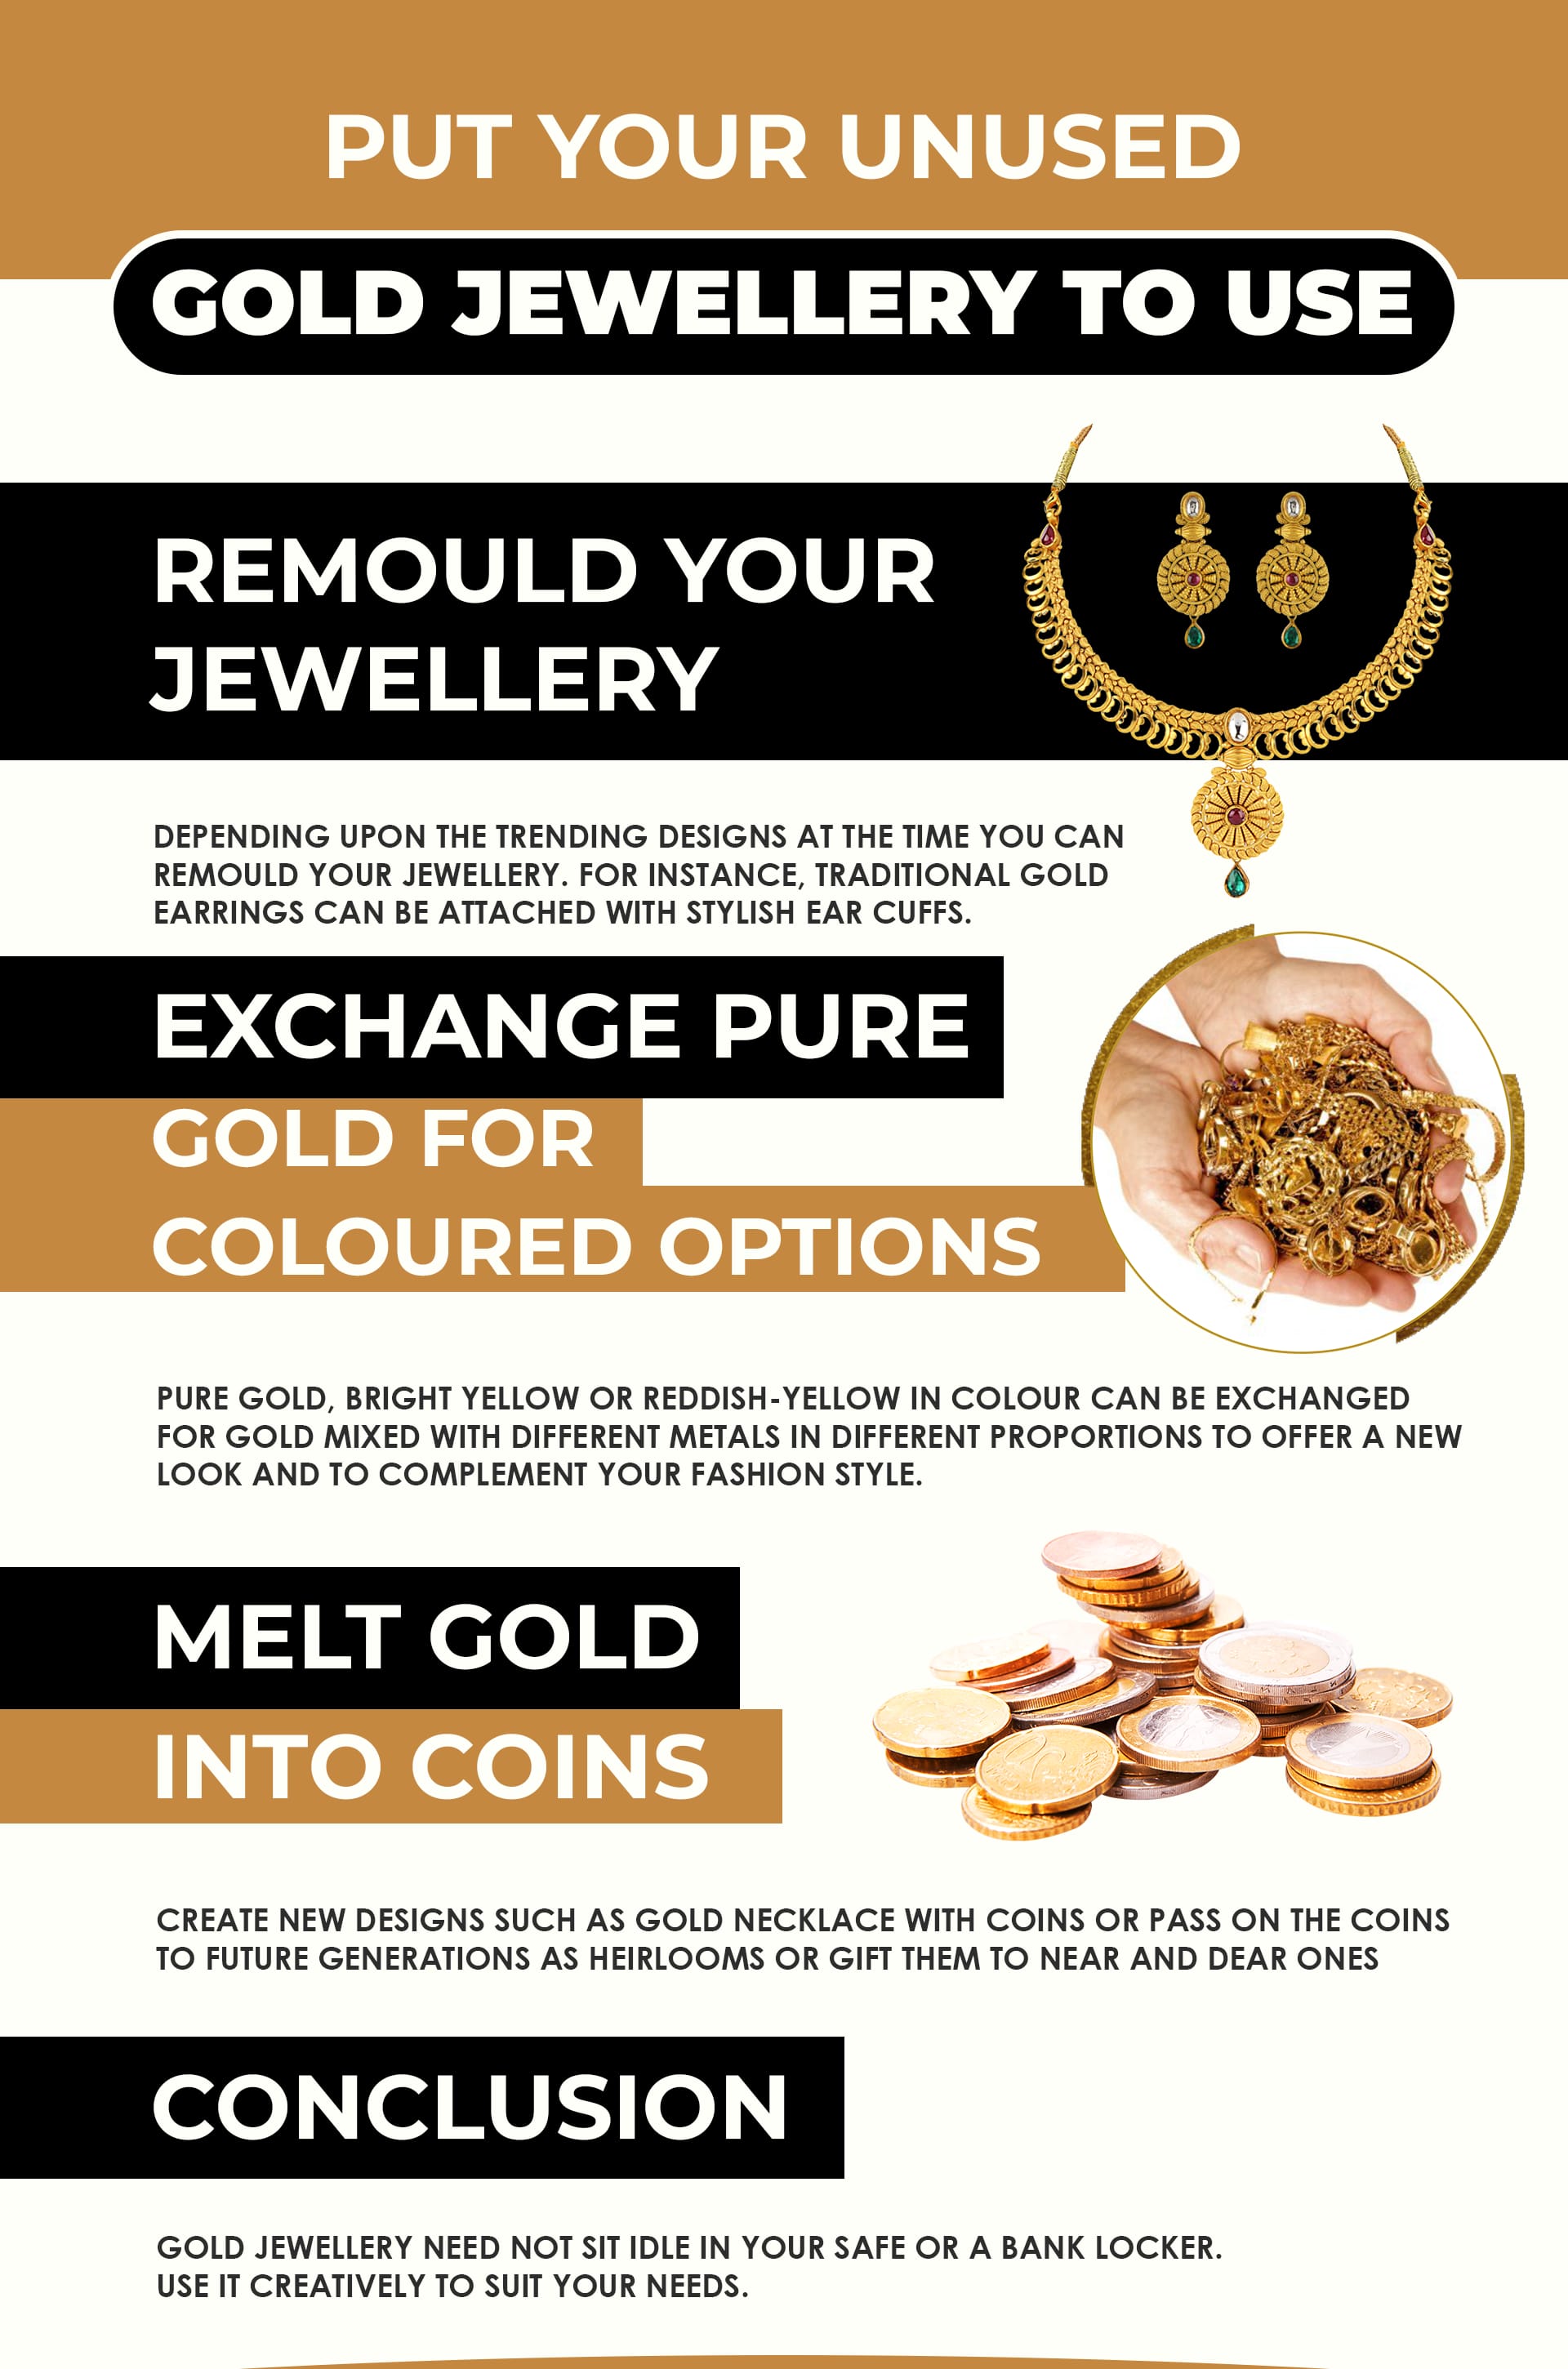 Put your unused gold jewellery to use